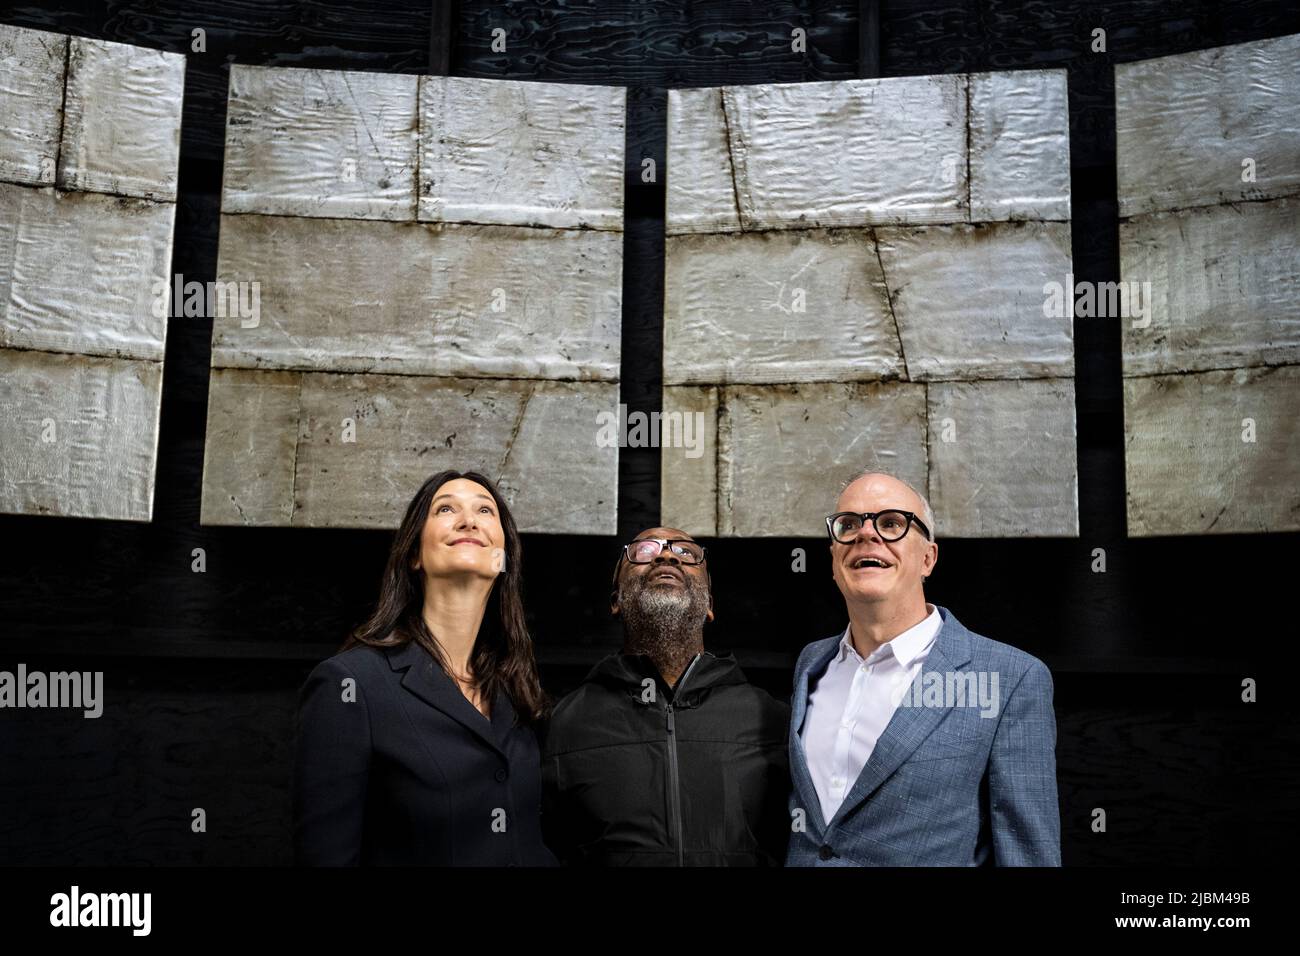 London, UK.  7 June 2022. (L to R) Bettina Korek, CEO, Serpentine, Chicago artist Theaster Gates and Hans Ulrich Obrist, Artistic Director, Serpentine, at the unveiling of “Black Chapel”, this year’s Serpentine Pavilion.  The structure, which is inspired by red by the architecture of chapels and the kilns of Stoke-on-Trent, pays homage to British craft and manufacturing traditions. Credit: Stephen Chung / Alamy Live News Stock Photo